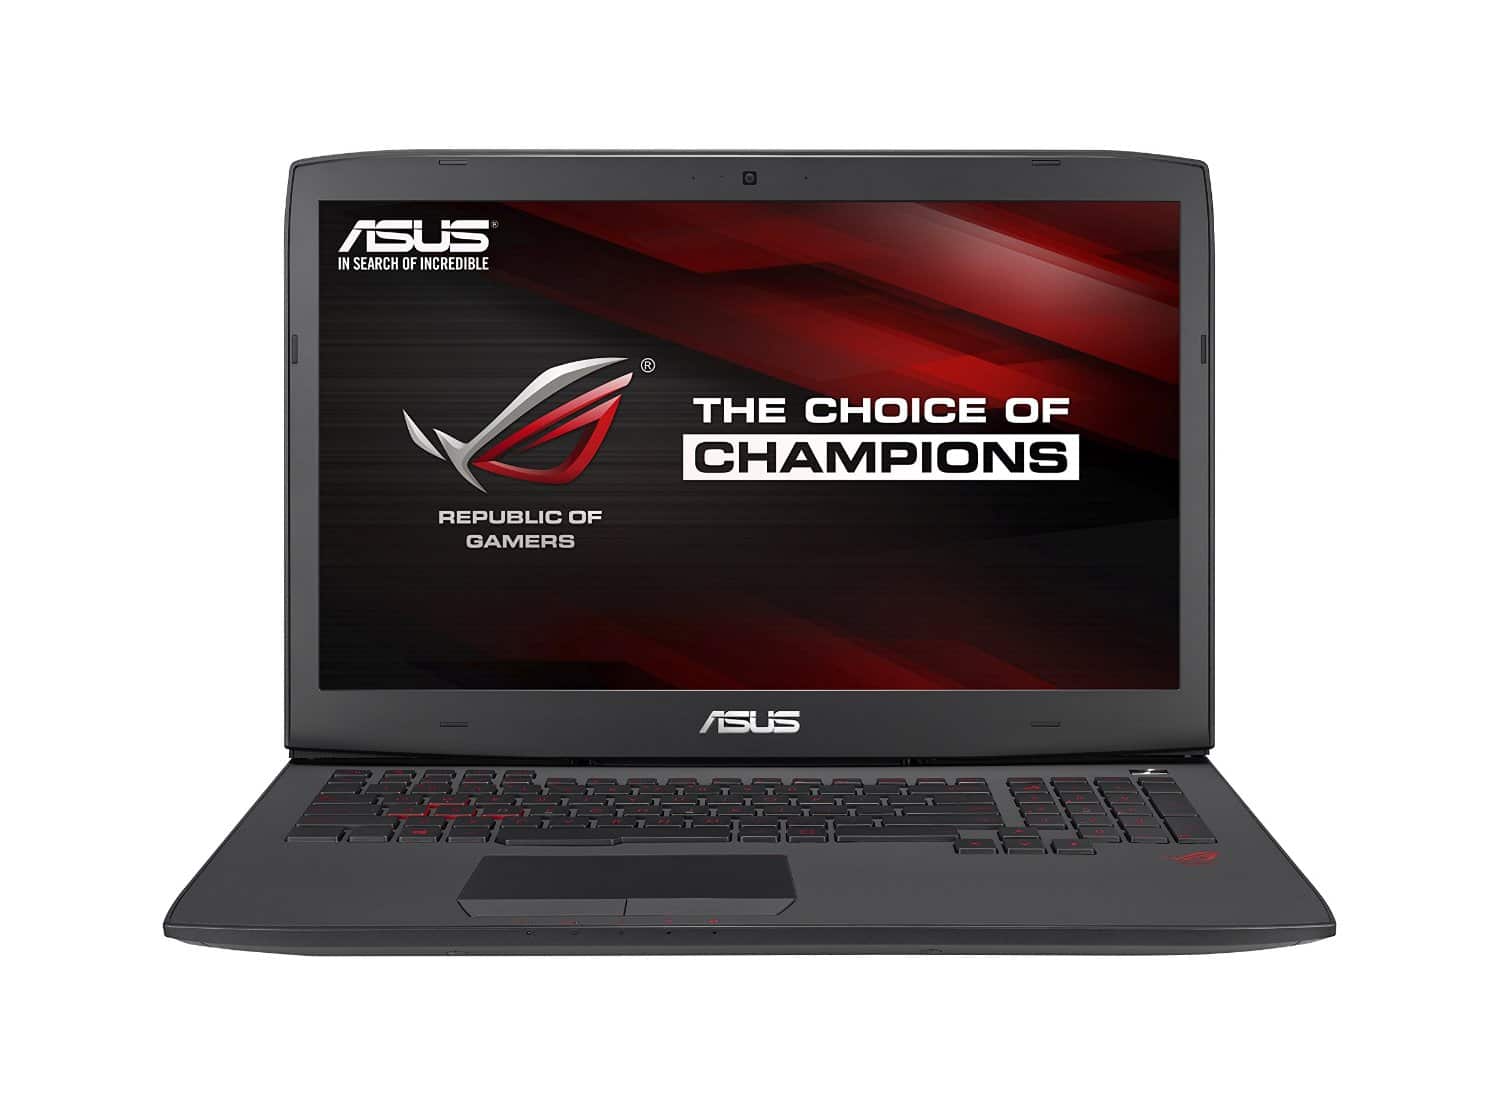 Top Best Asus Gaming Laptops To Buy In 2020 - November 2020 Technobezz Best